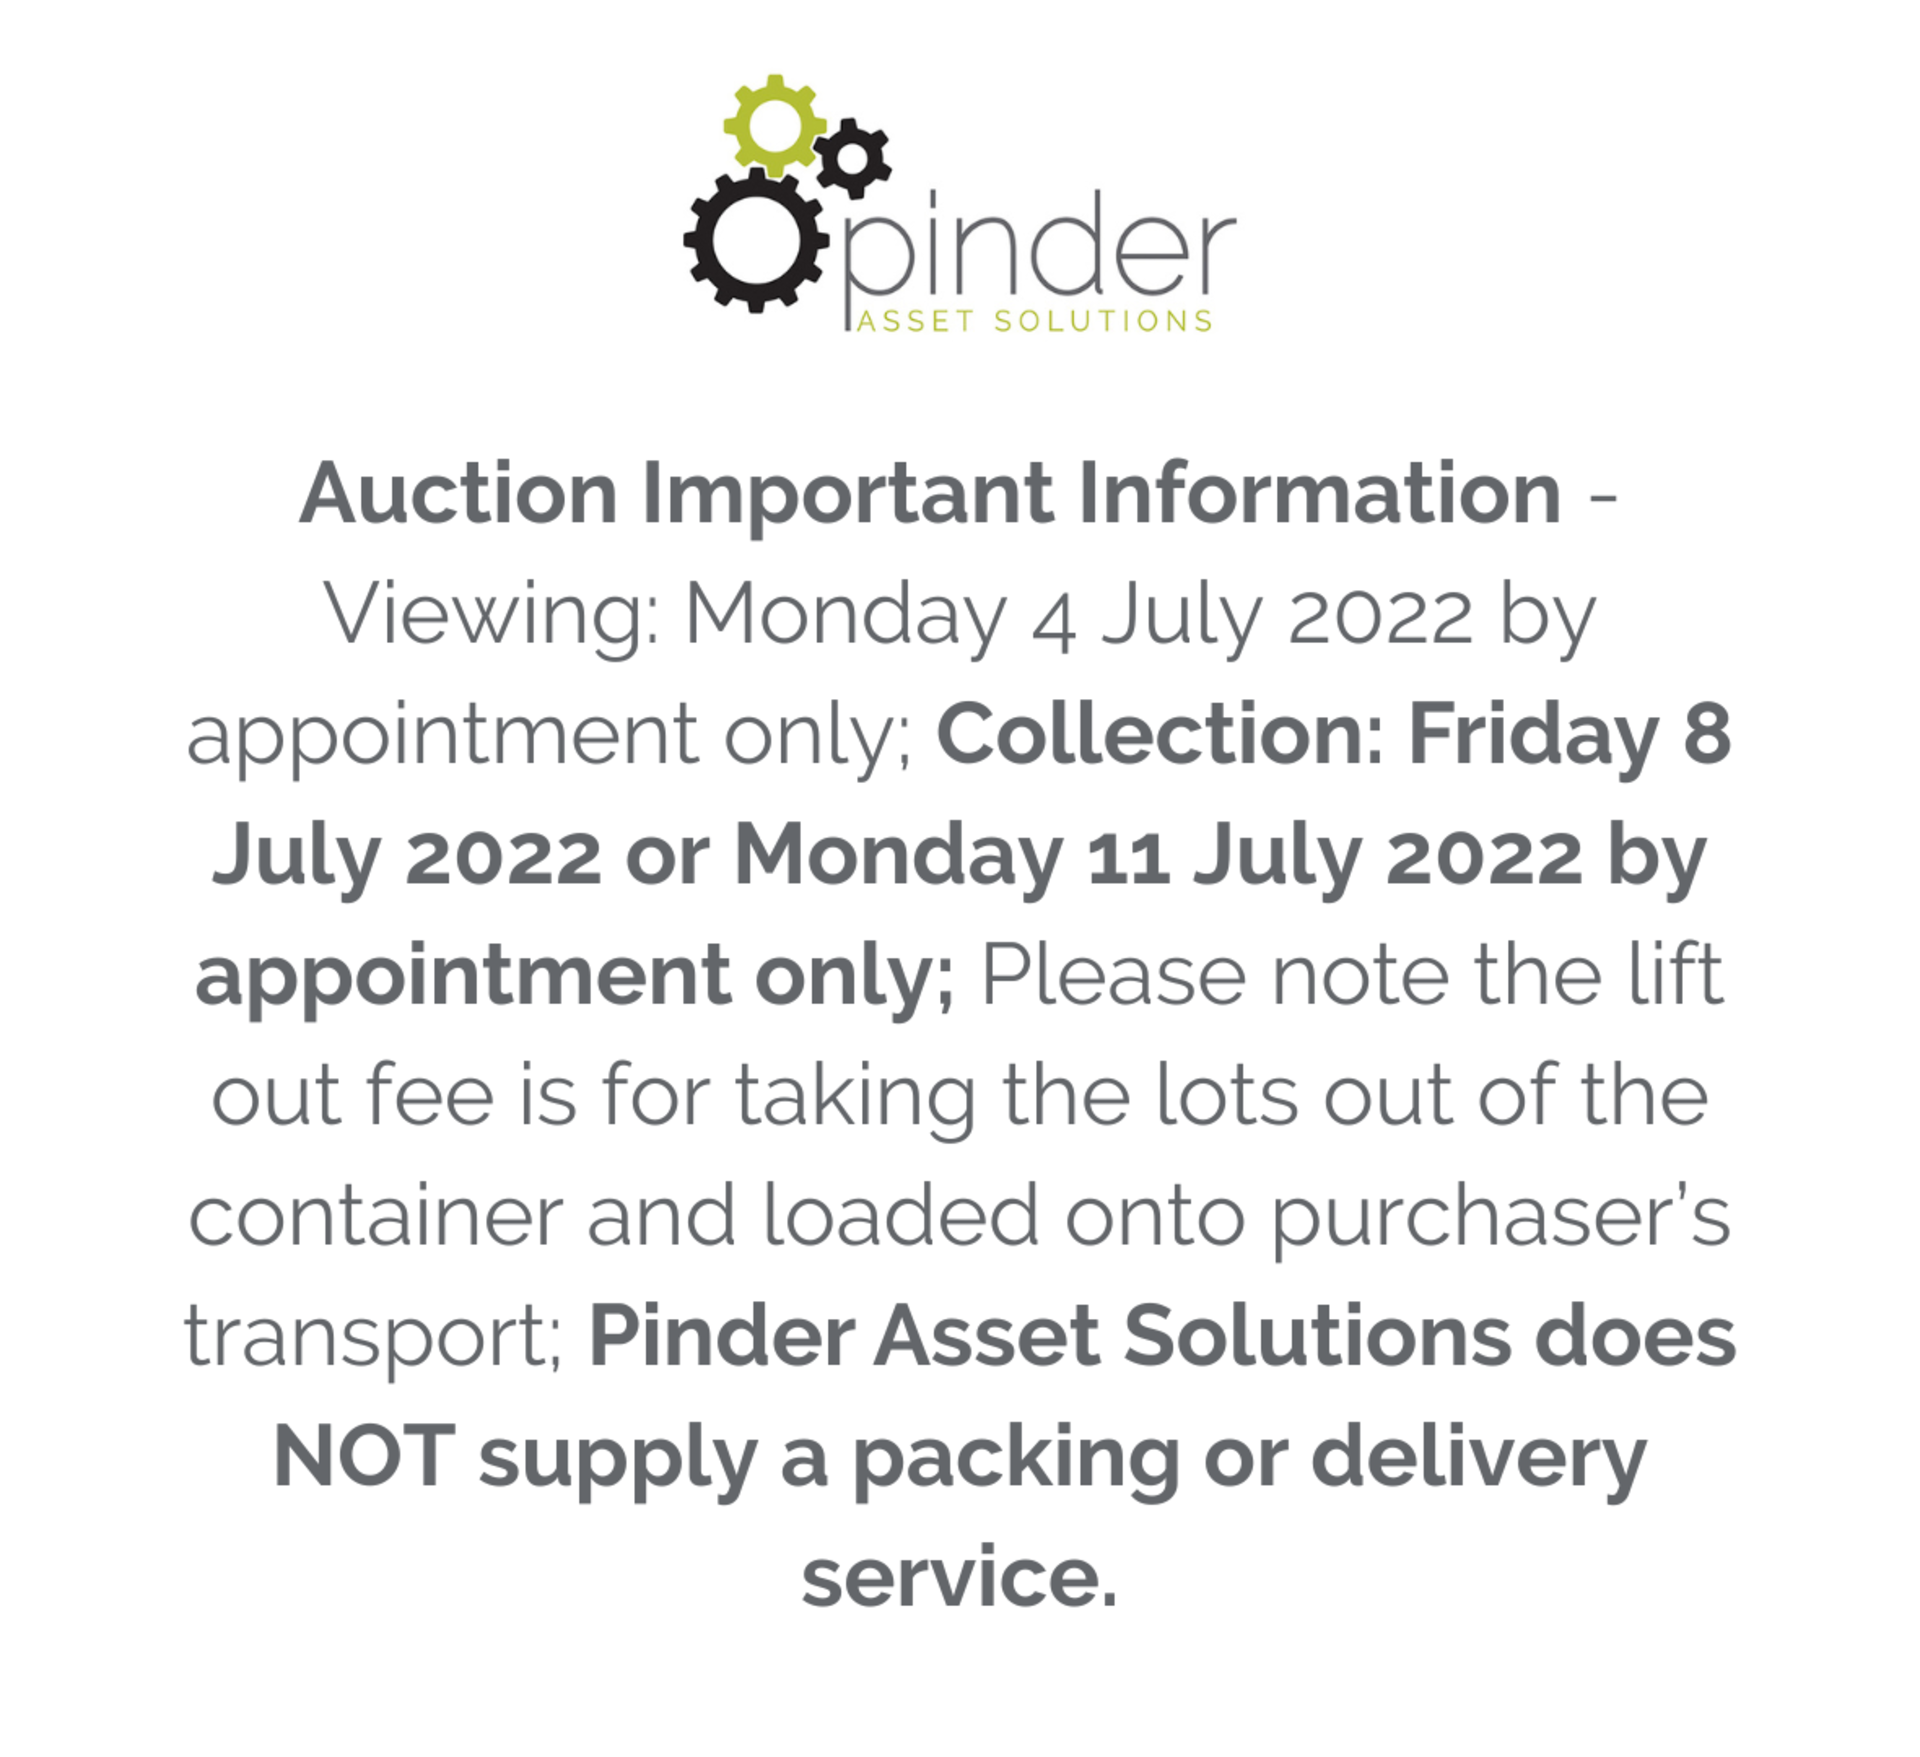 Auction Important Information - Viewing: Monday 4 July 2022 by appointment only; Collection: